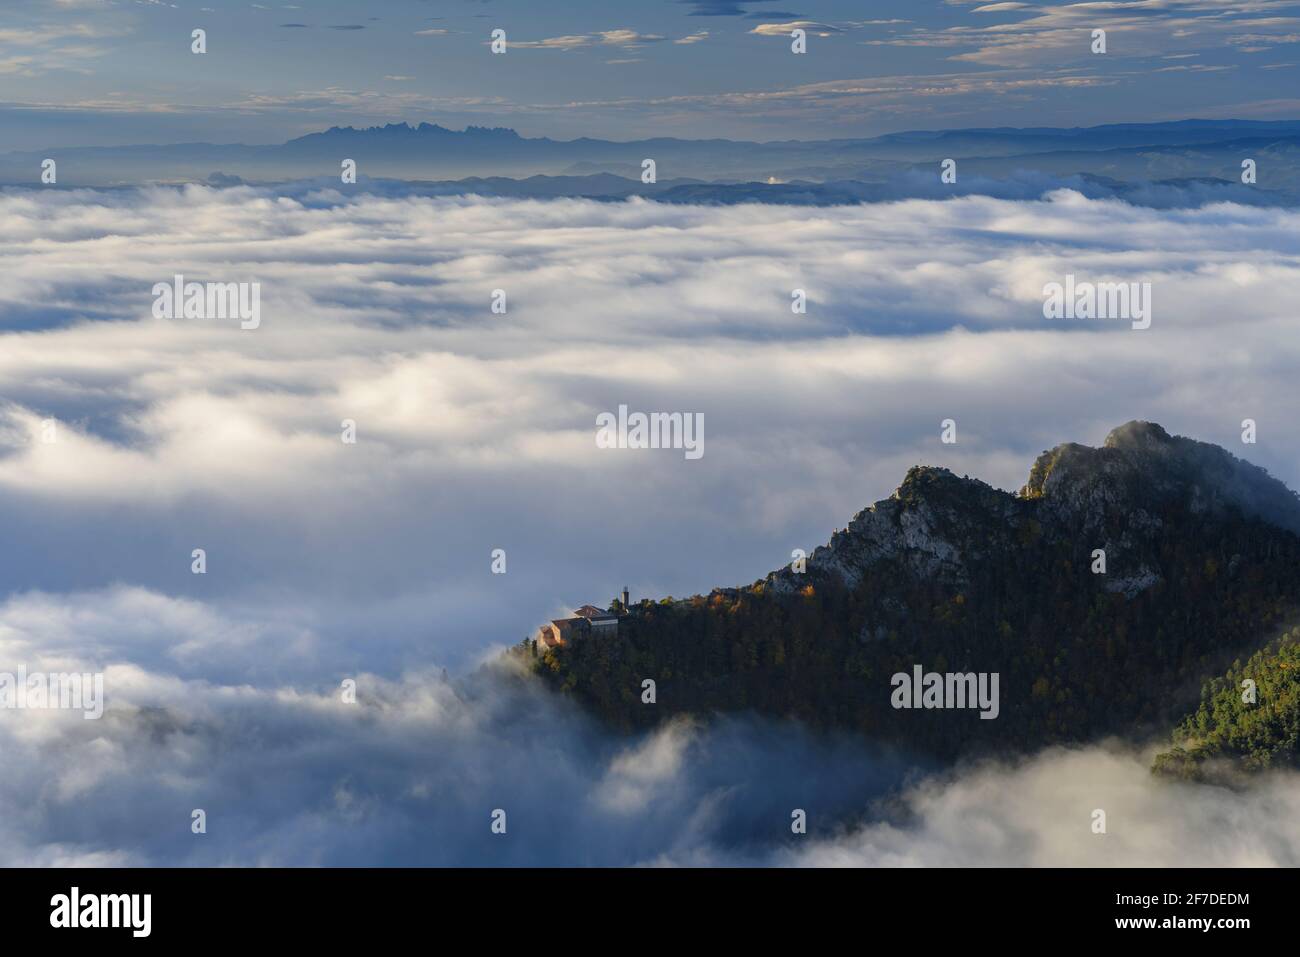 Montserrat mountain in a winter sunrise over a sea of clouds seen from the Figuerassa viewpoint, (Berguedà, Catalonia, Spain, Pyrenees) Stock Photo